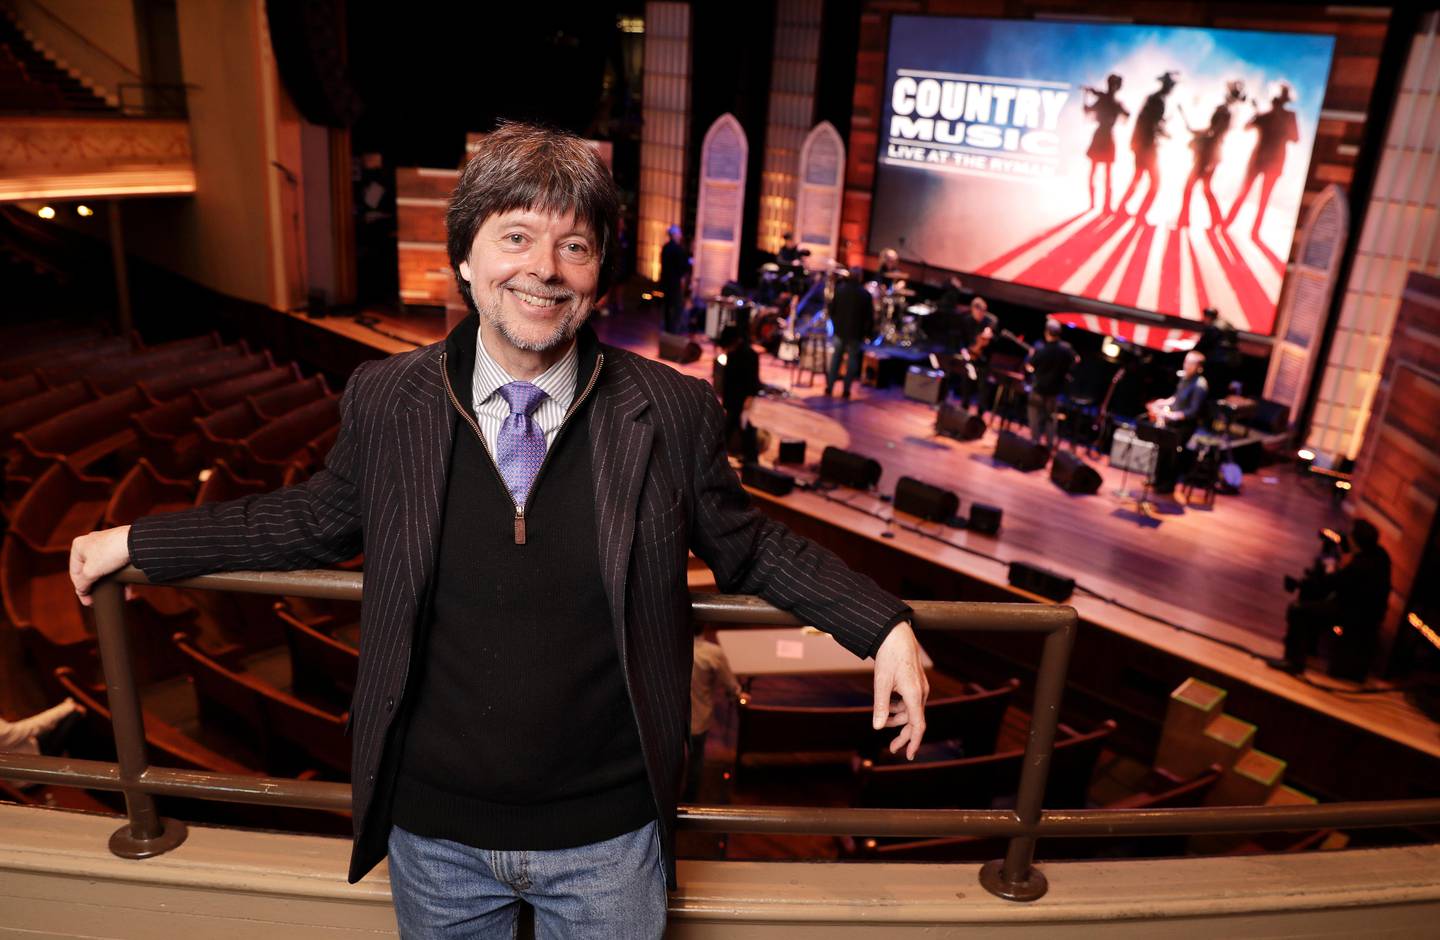 Filmmaker Ken Burn poses in the Ryman Auditorium Wednesday, March 27, 2019, in Nashville, Tenn. The Ryman was home to the Grand Ole Opry from 1943 to 1974. Burns hit the road this month on a bus trip to preach the gospel of "Country Music," his new PBS film airing in September. (AP Photo/Mark Humphrey)